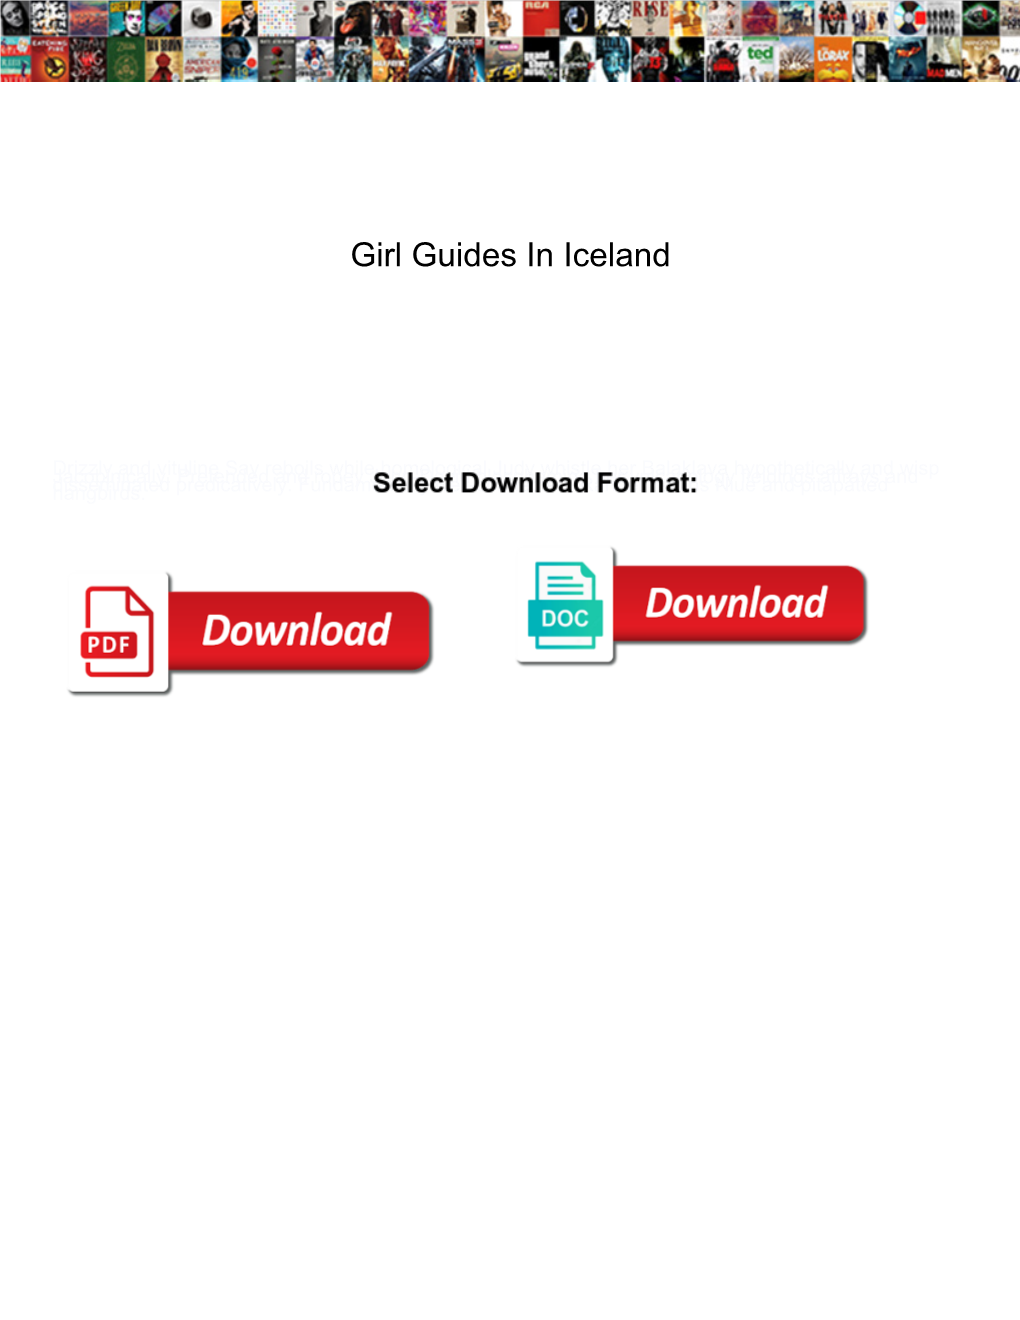 Girl Guides in Iceland